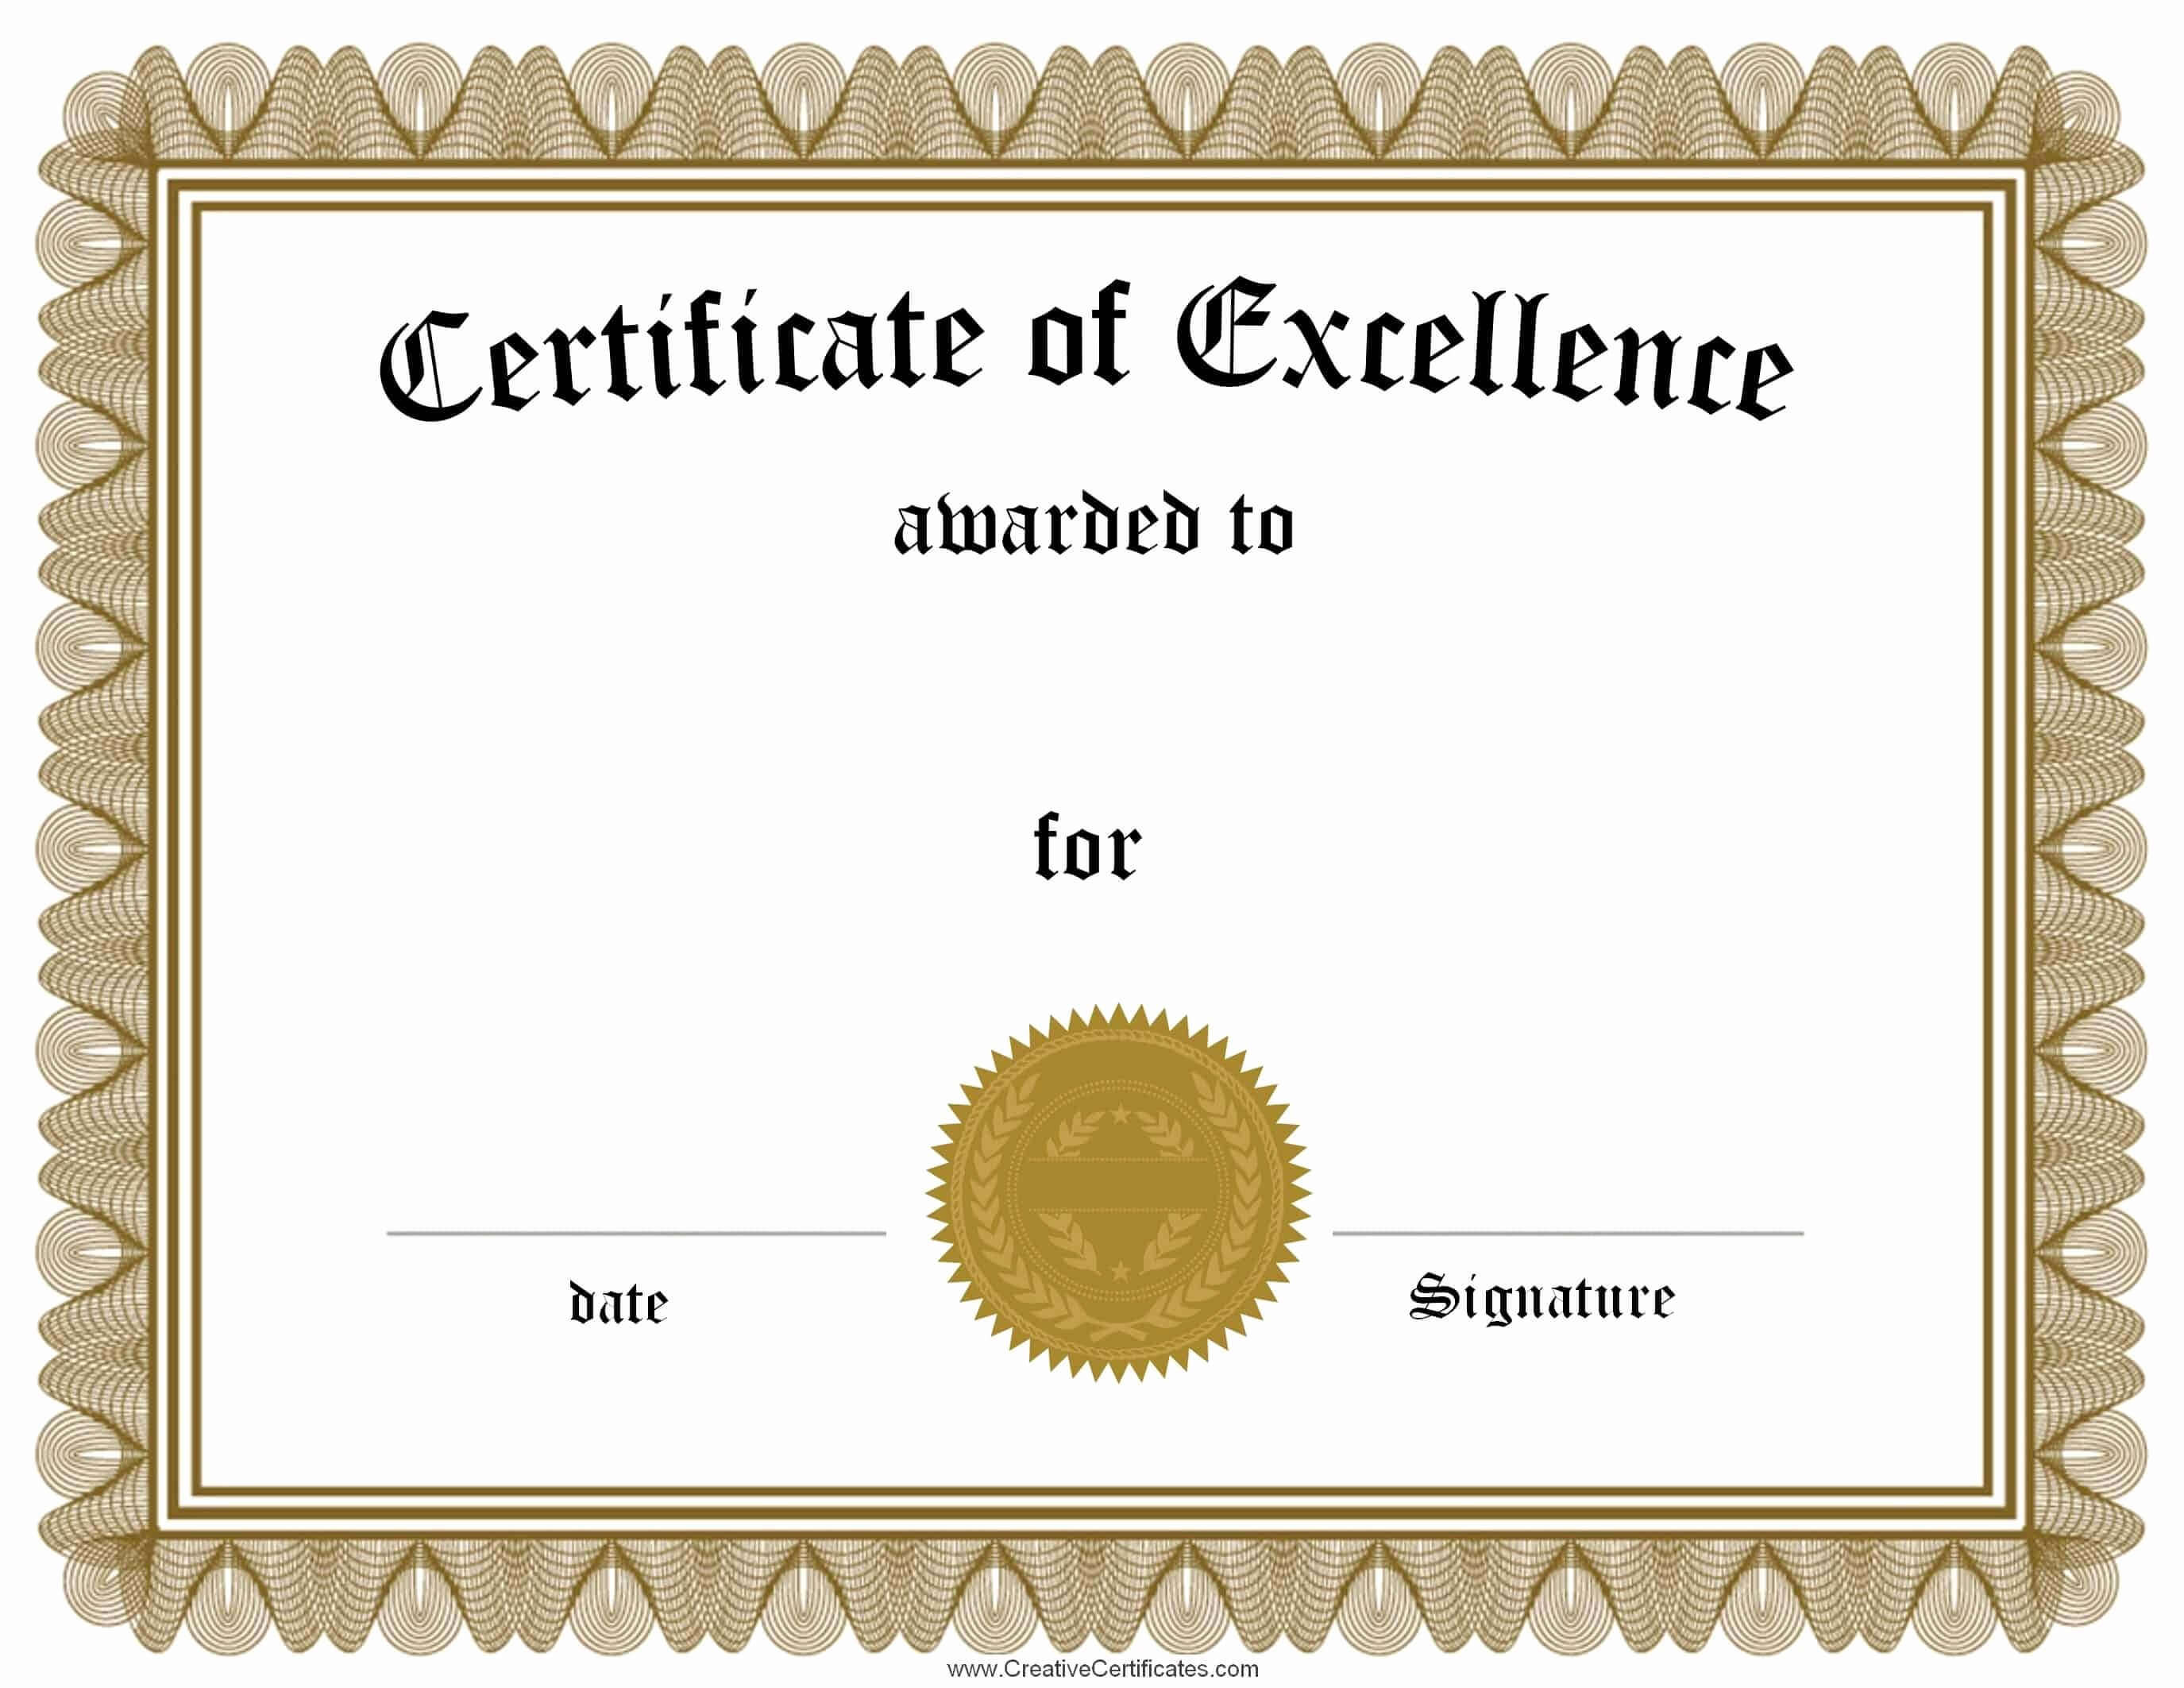 Academic Excellence Award Certificate Template New Free Within Academic Award Certificate Template